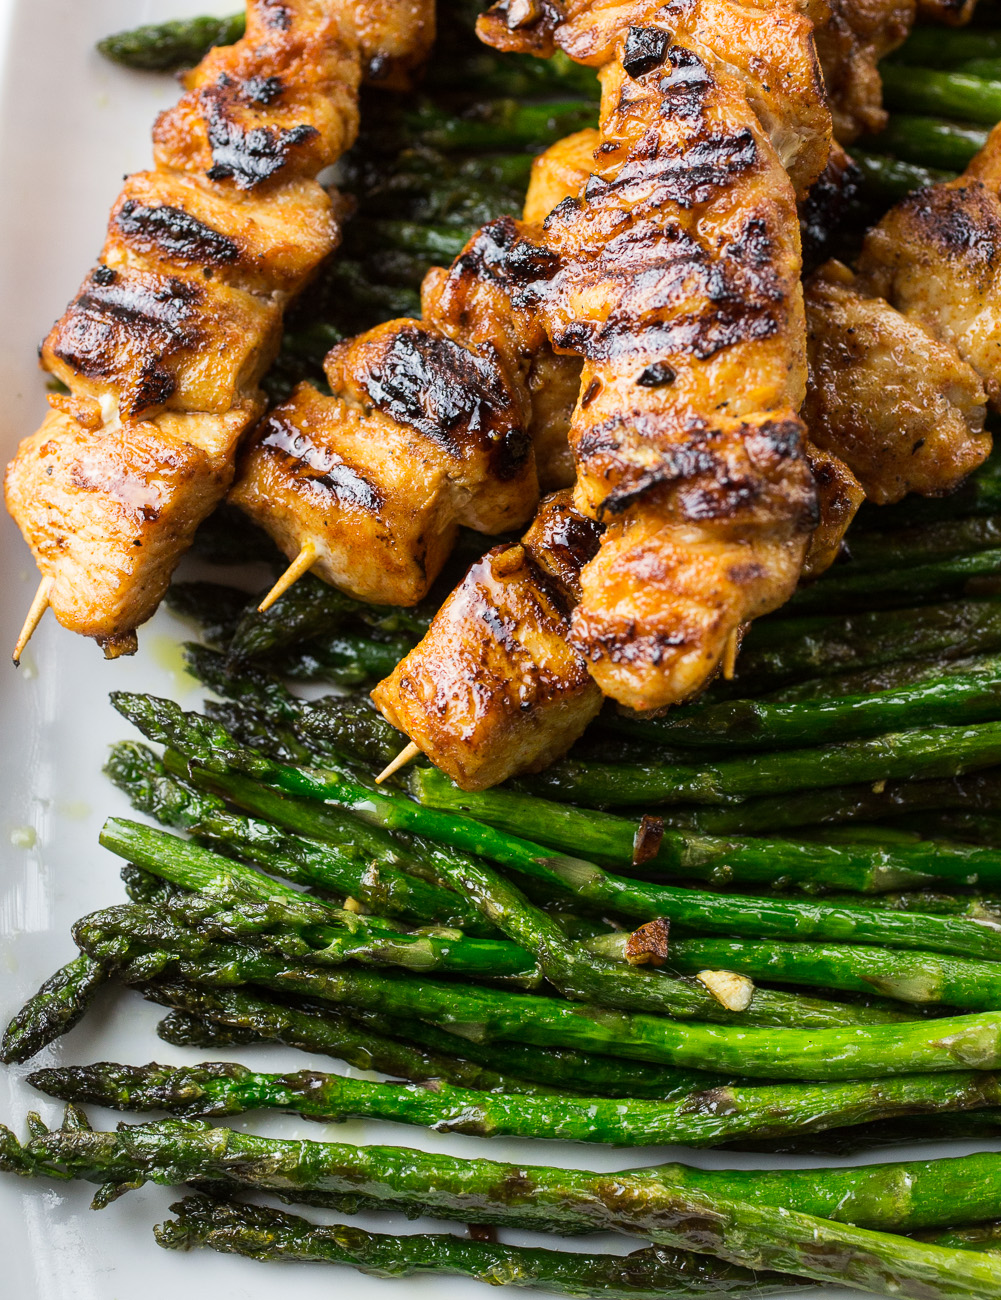 Spicy chicken skewers with roasted asparagus | thegirllovestoeat.com